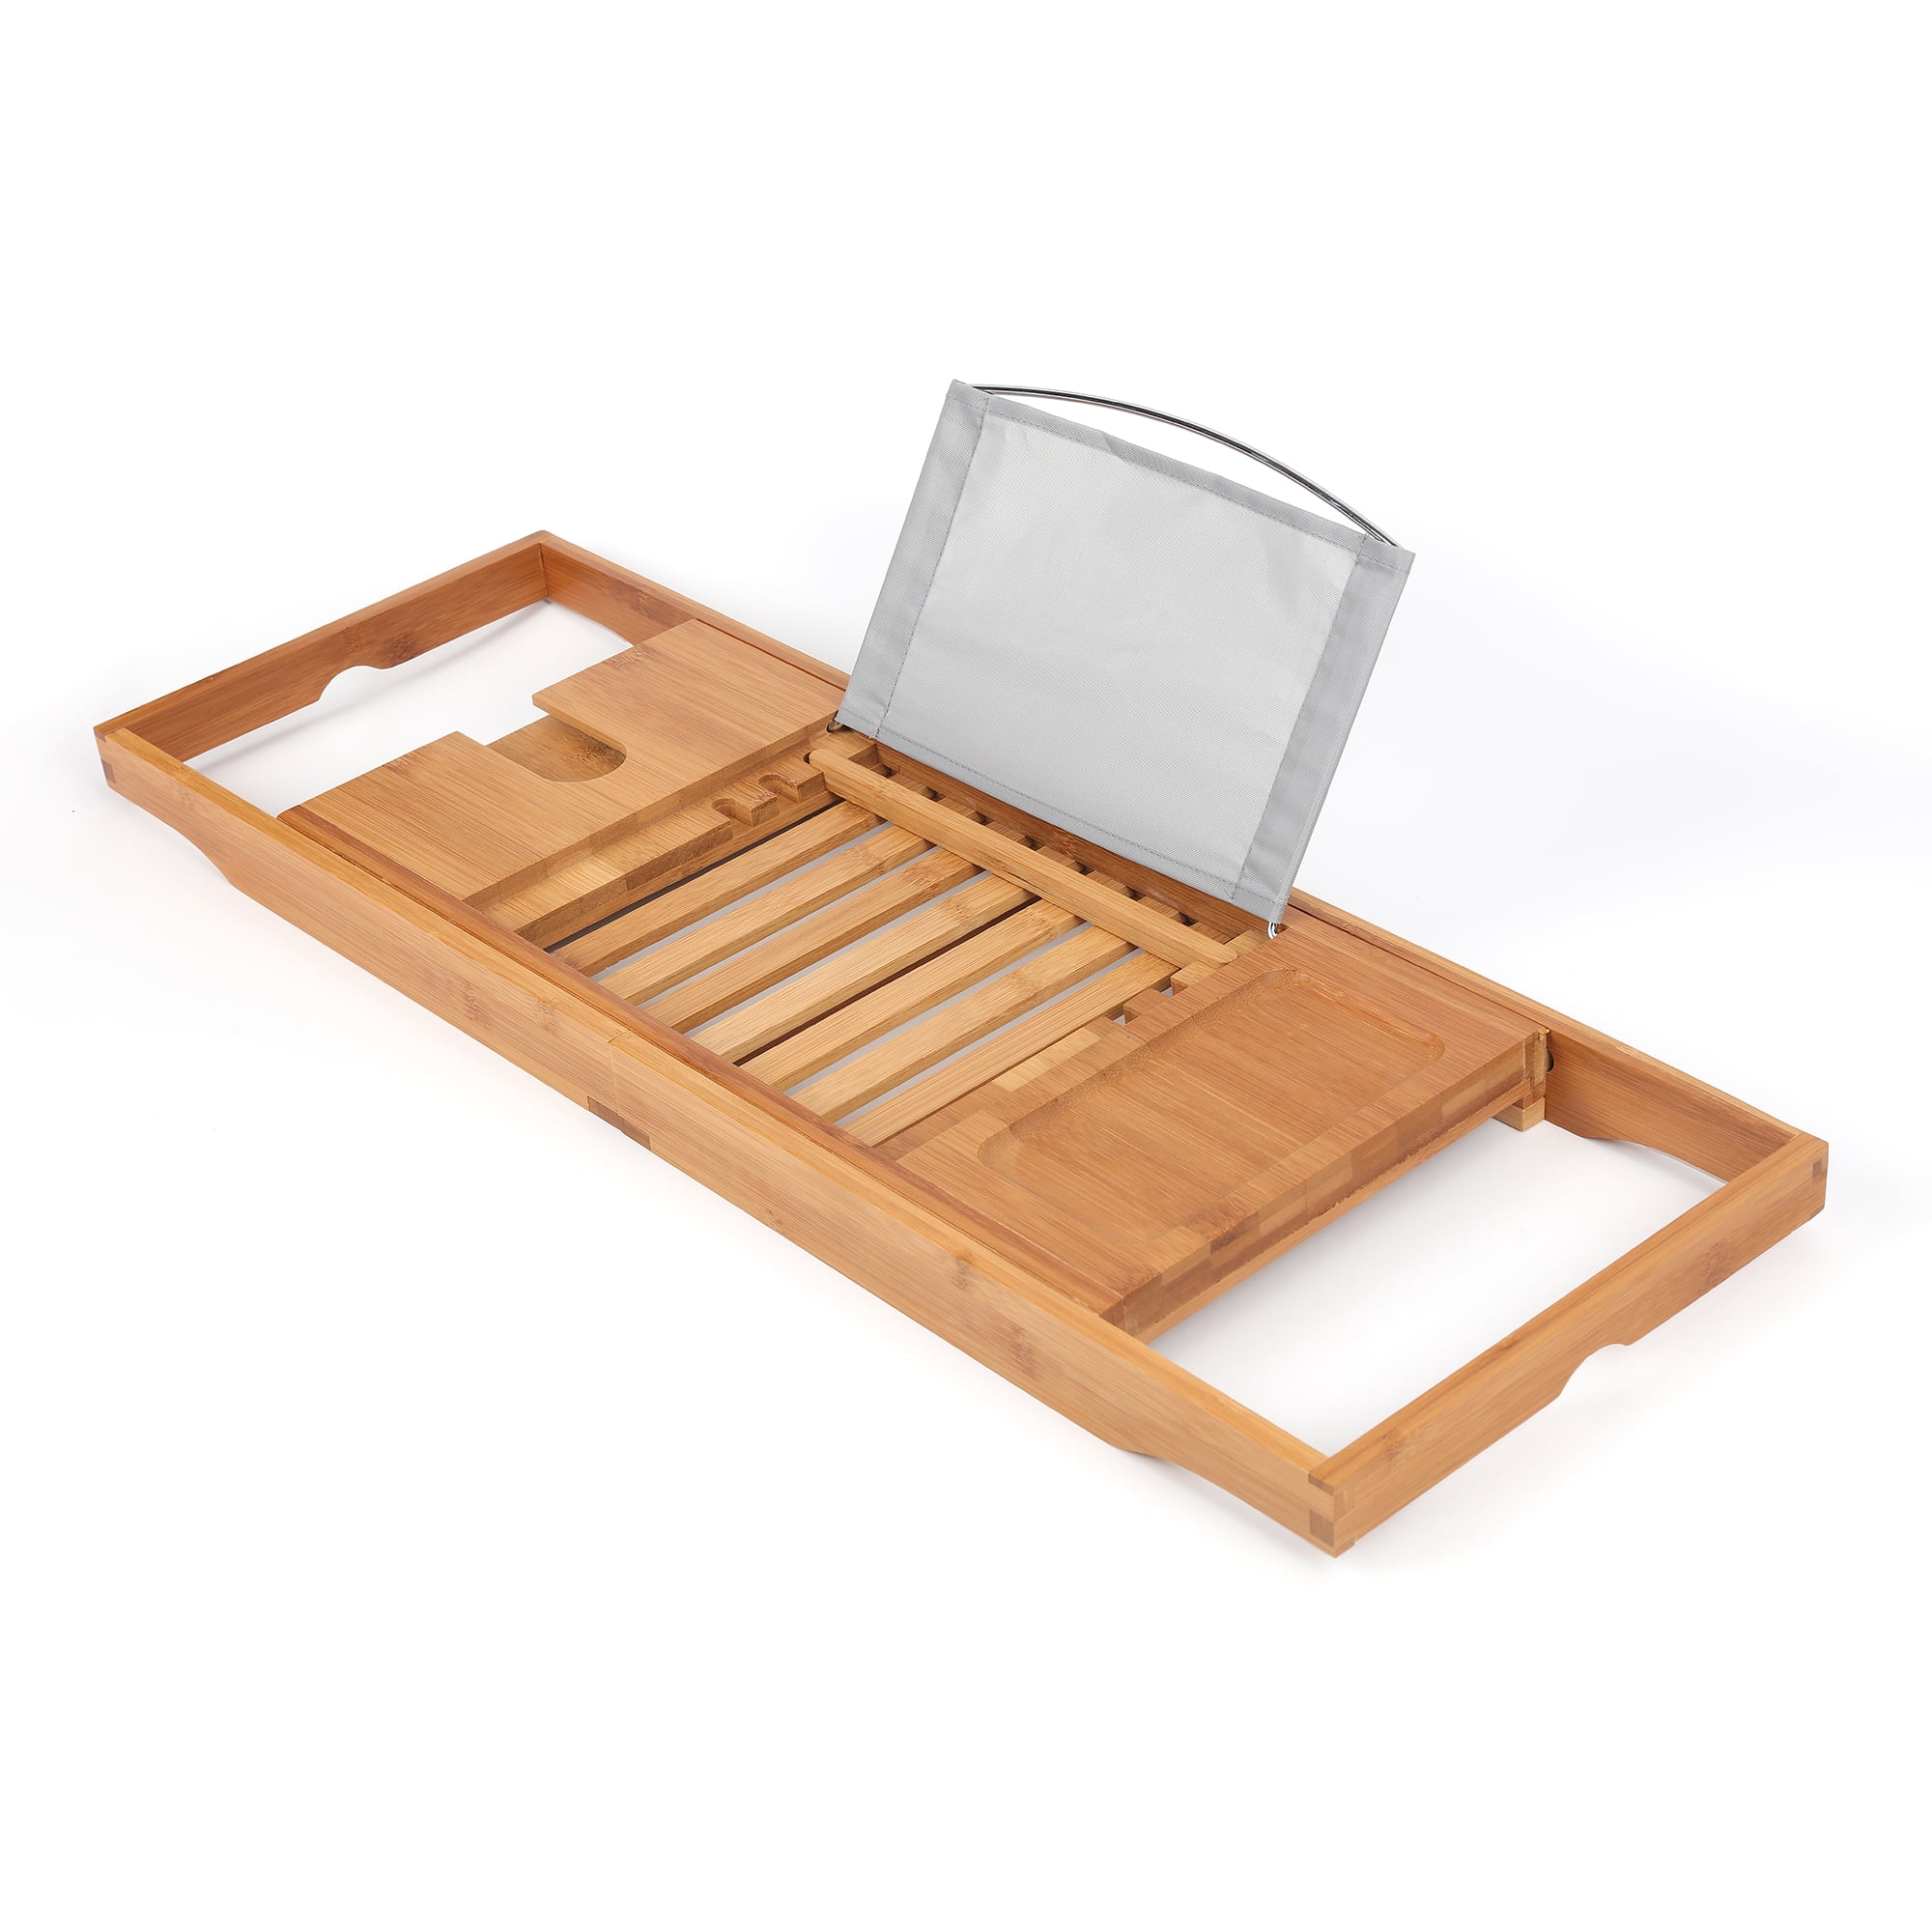 Fitnate Luxury Bamboo Bathtub Caddy Bath Tub Organizer Tray with Stand Foot Extending Sides Brown